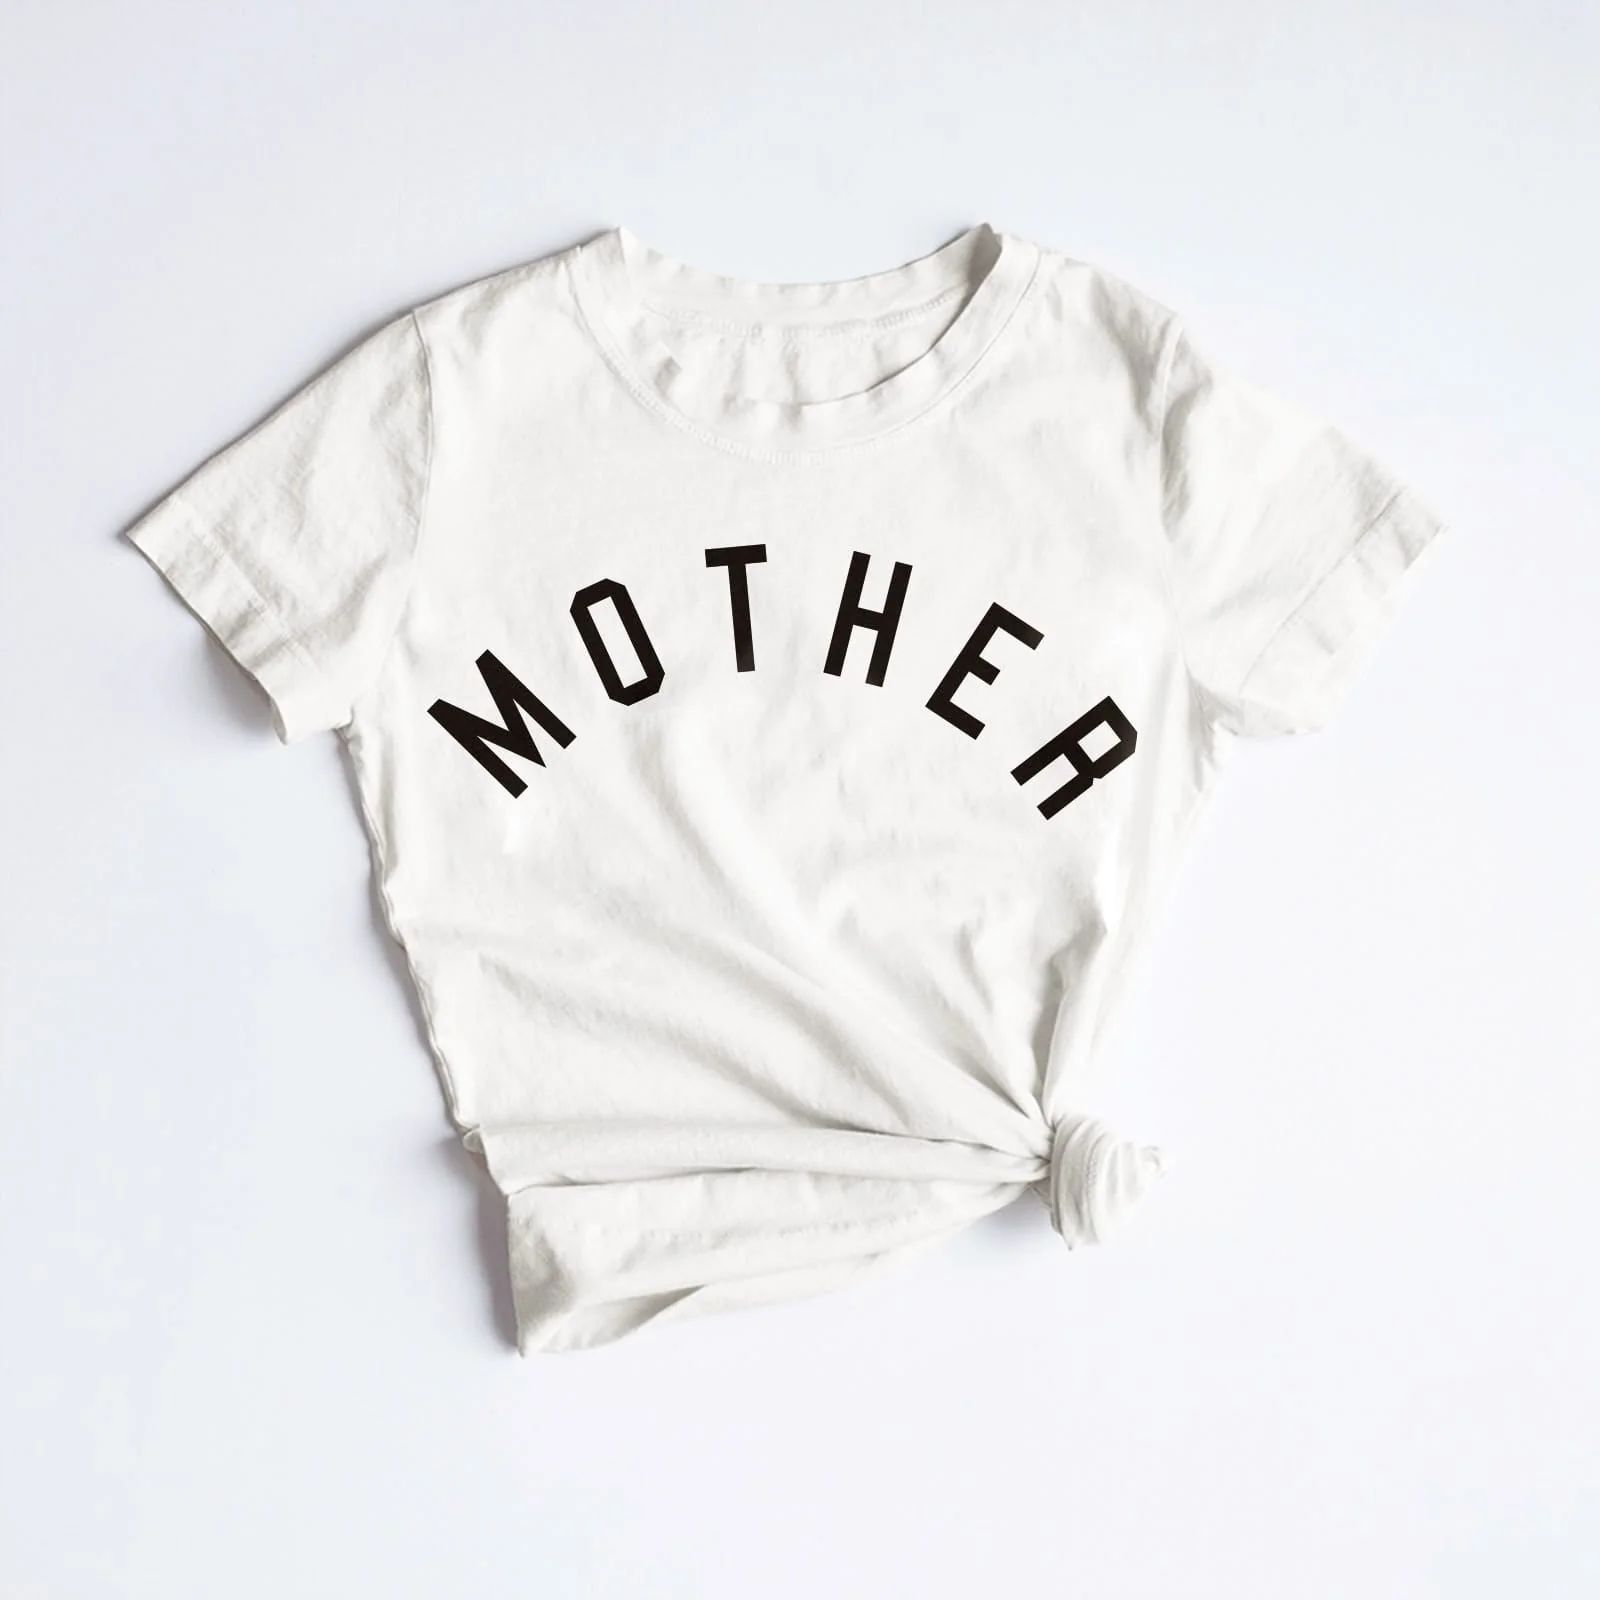 Mothers Tee in White, Womans Mothers T shirt in White - Ford And Wyatt | Ford and Wyatt